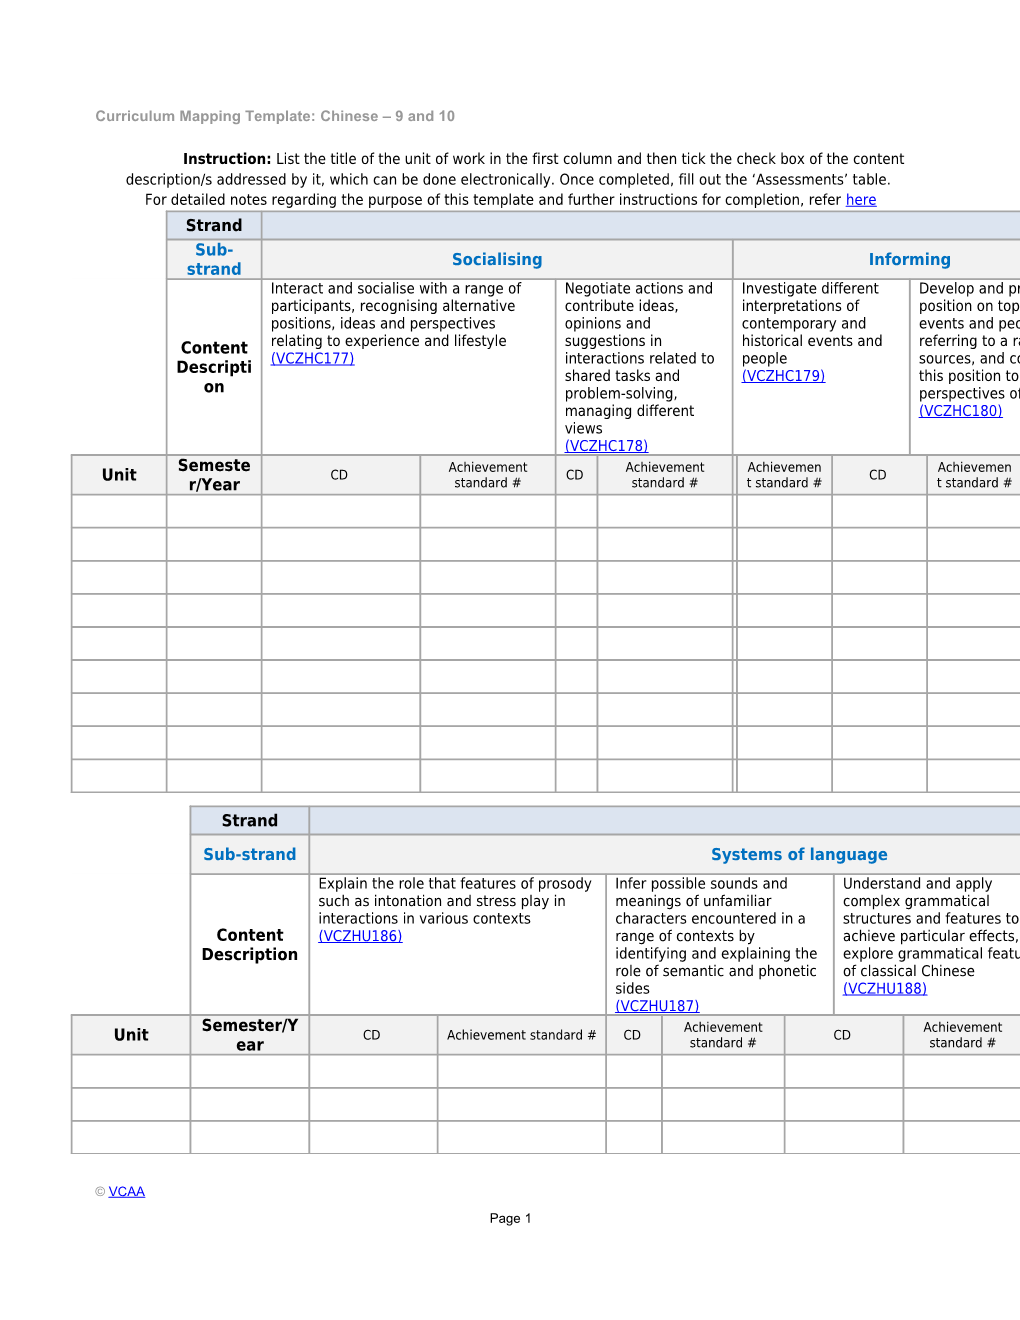 Curriculum Mapping Template: Chinese 9 and 10